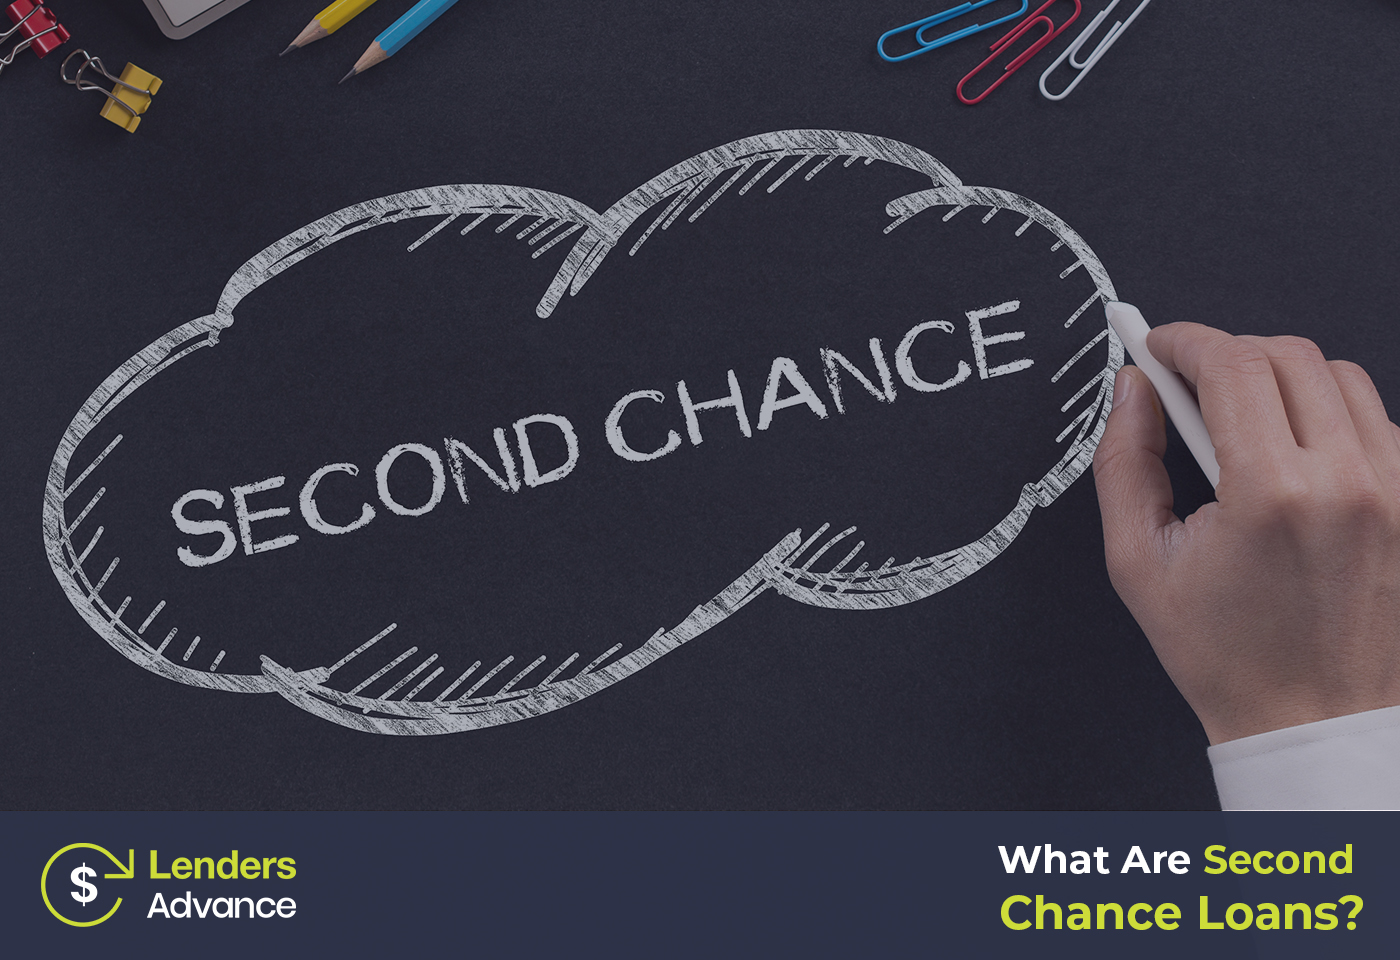 What Are Second Chance Loans?